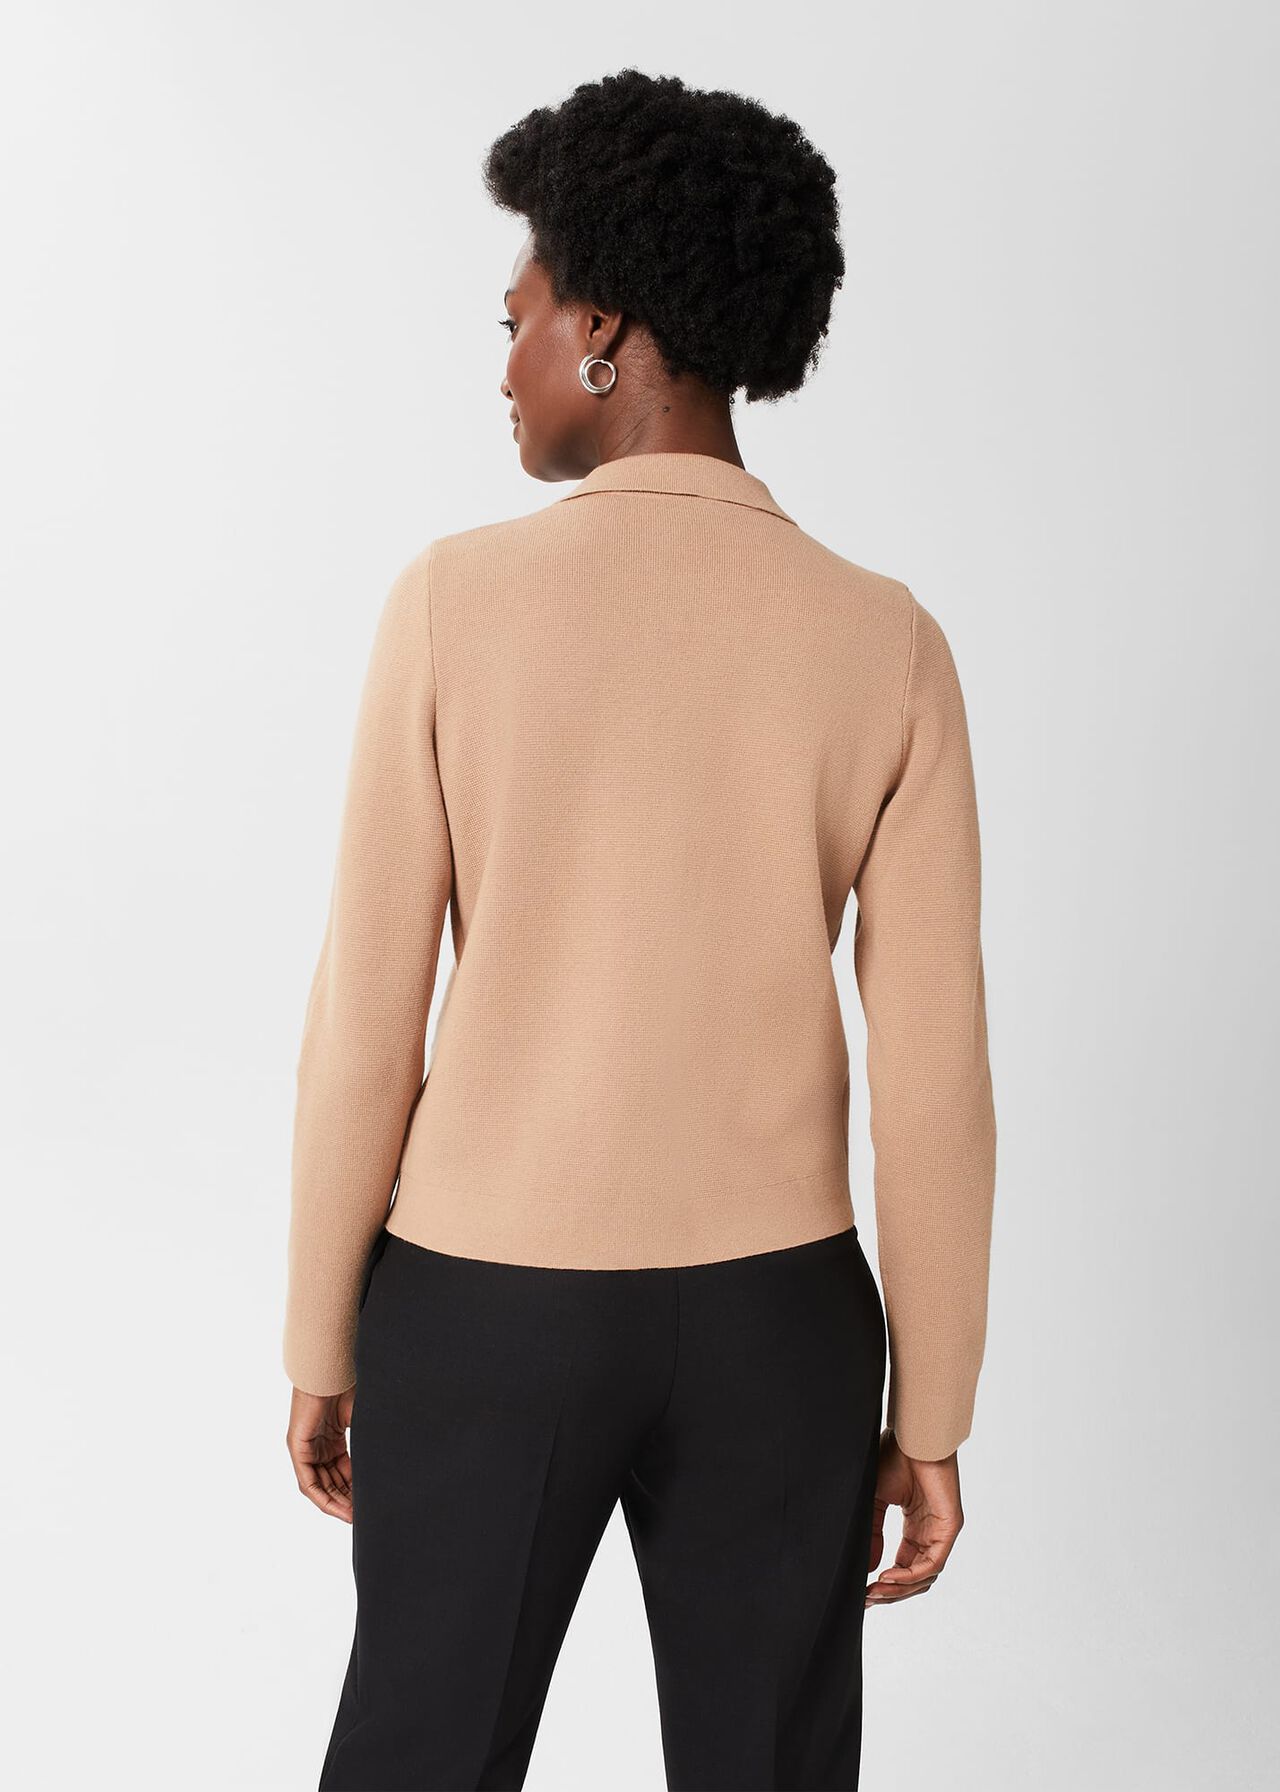 Mia Cotton Wool Knitted Jumper, Hobbs Camel, hi-res